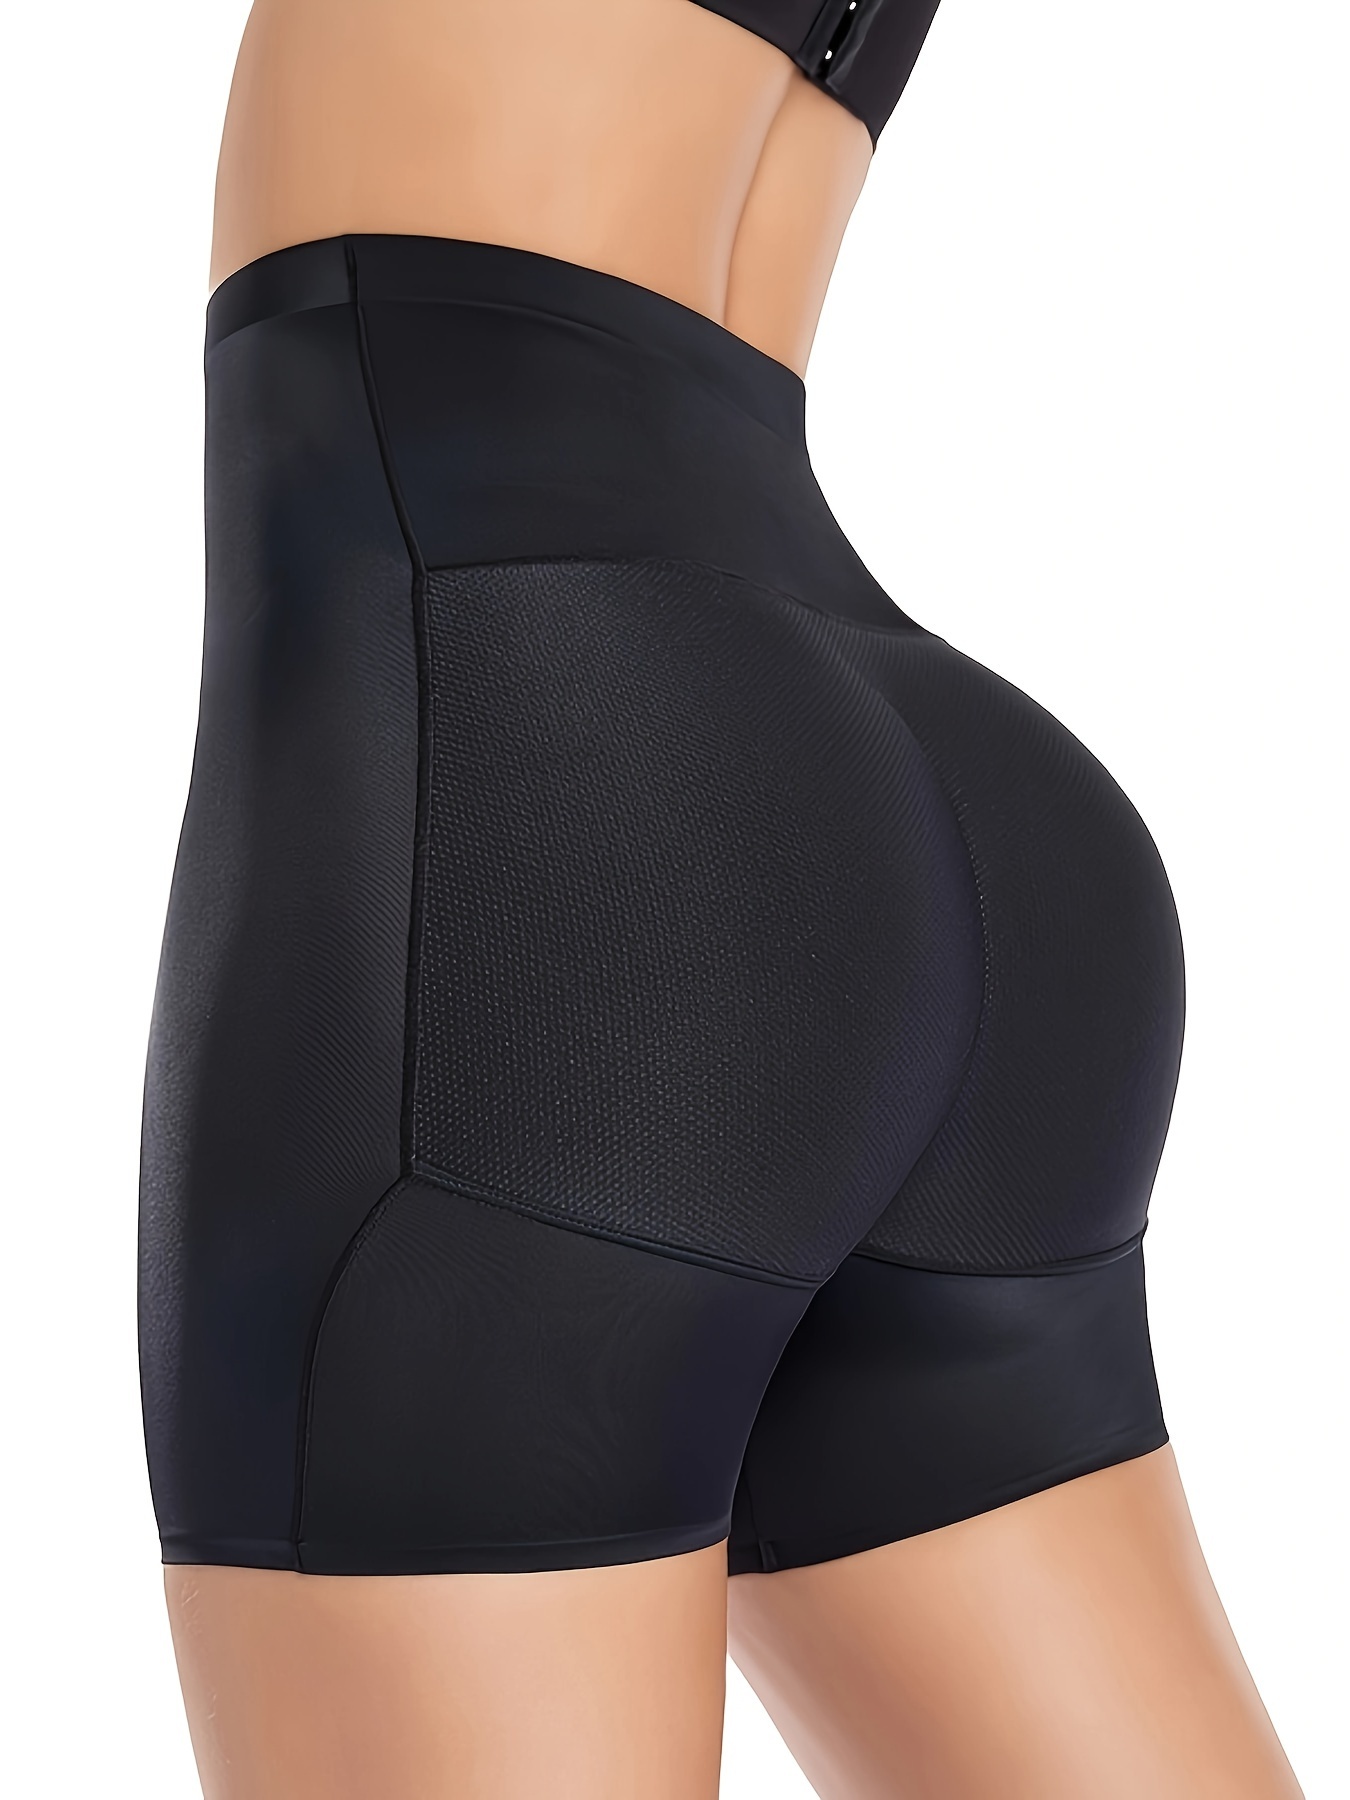 * Butt Padded Shaping Panties, Comfy Butt Lifting Slimming Panties, Women's  Lingerie & Underwear